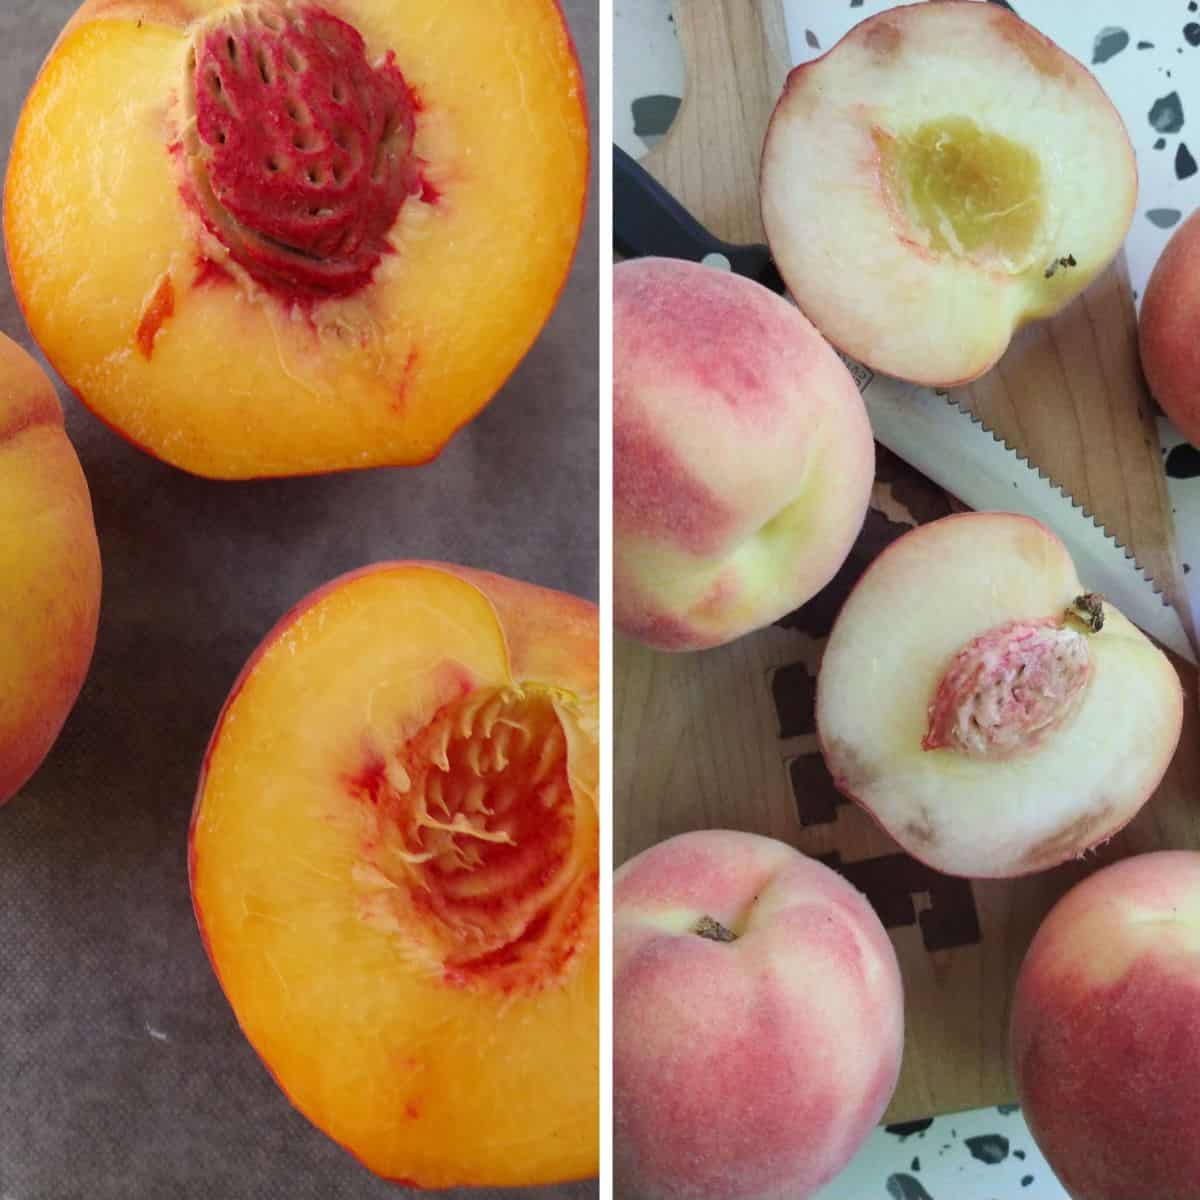 A side by side picture, on the left are cut open yellow flesh peaches and on the right is sliced open white flesh peaches.